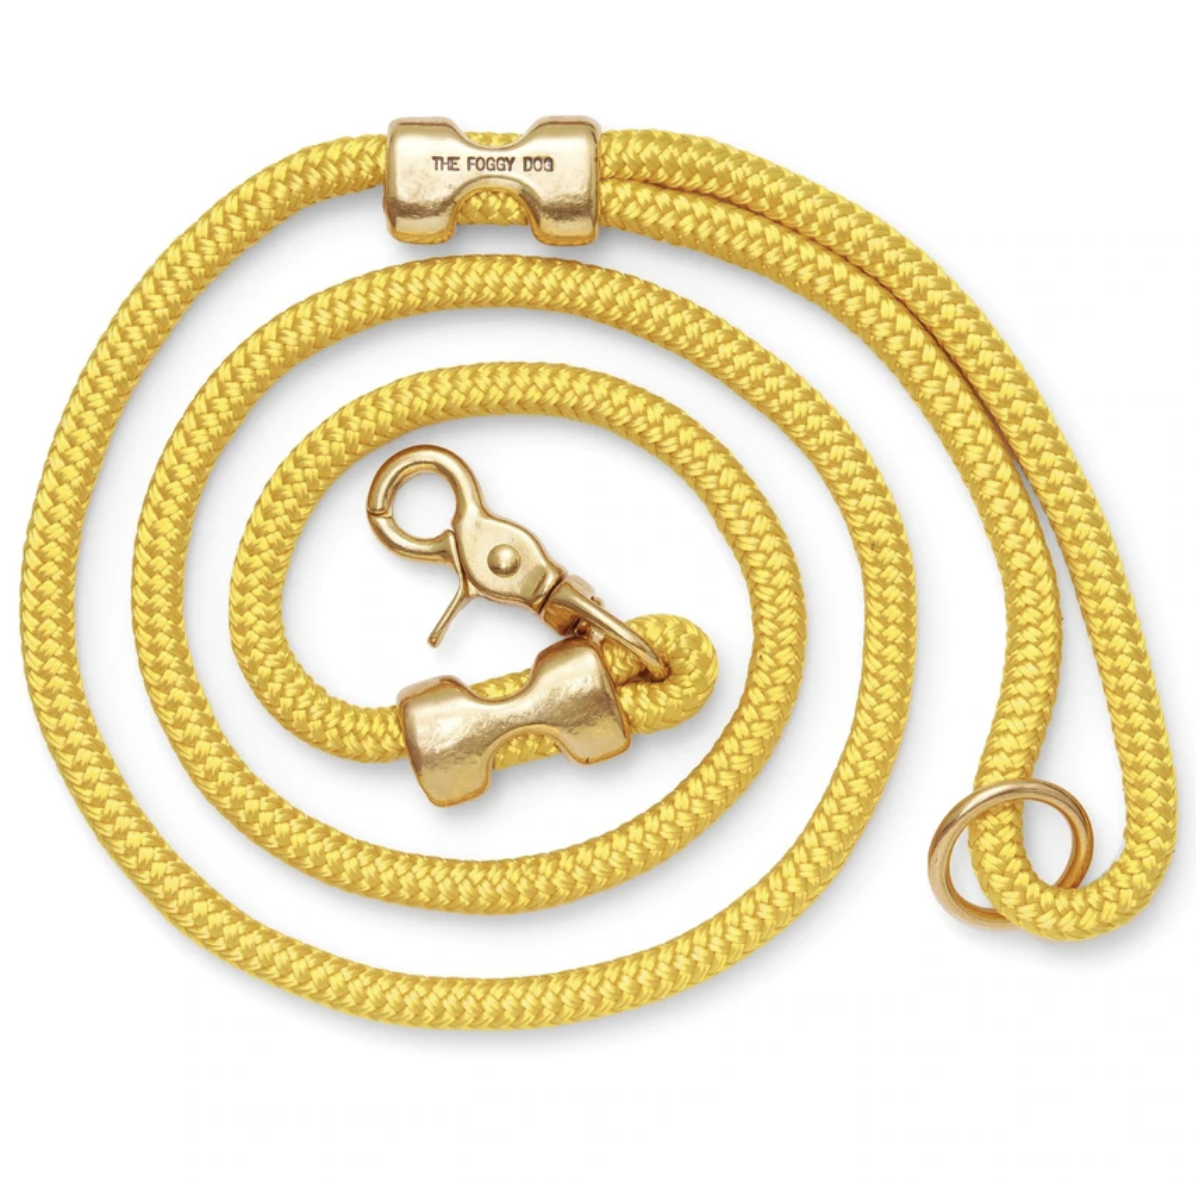 Gold Rope Leash